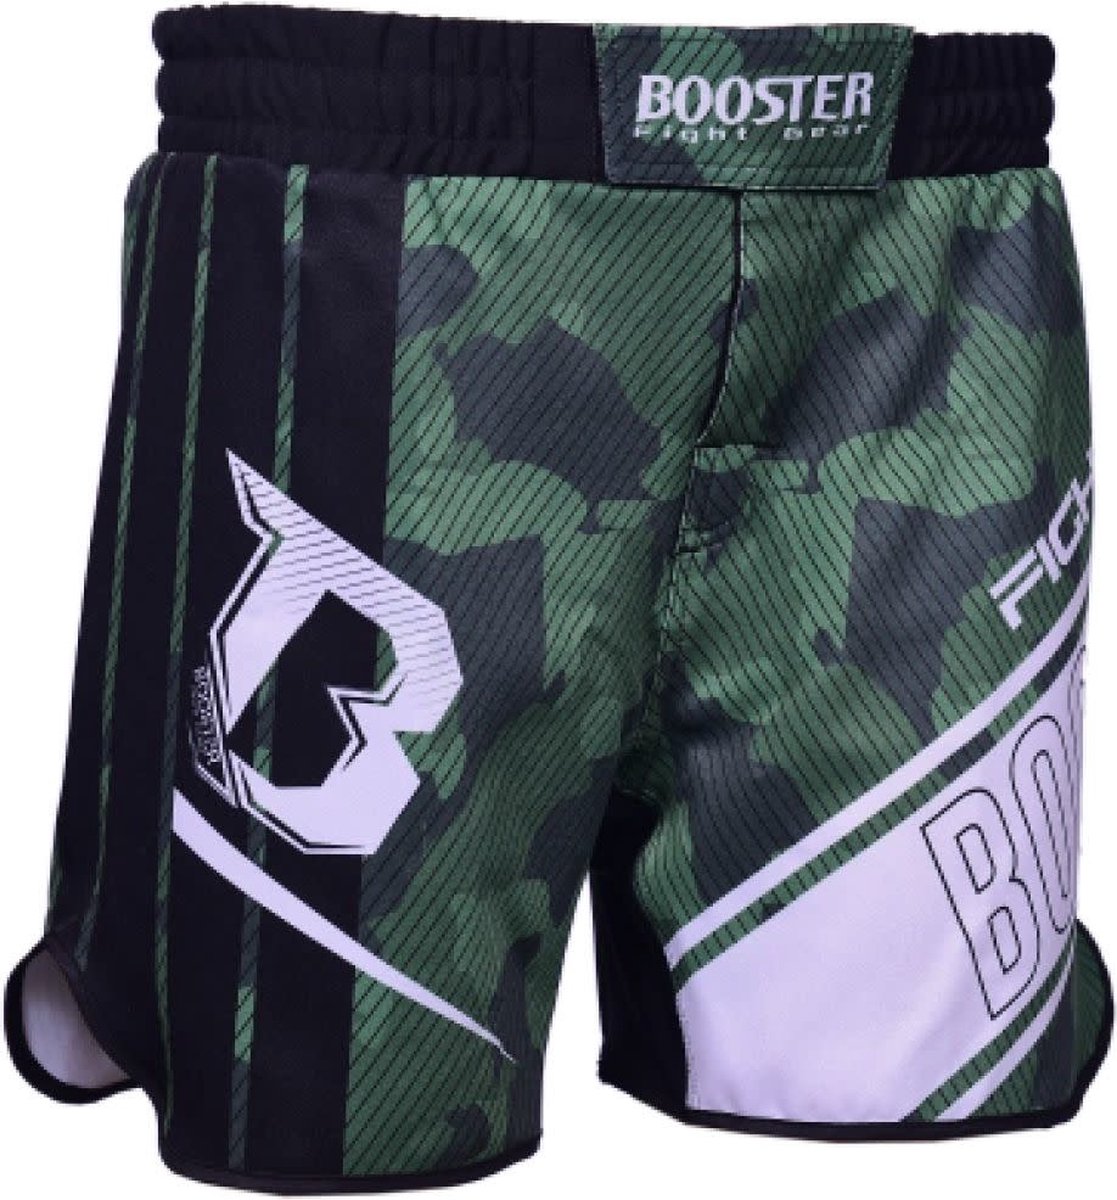 booster - fightshort - TRUNK - be force 3